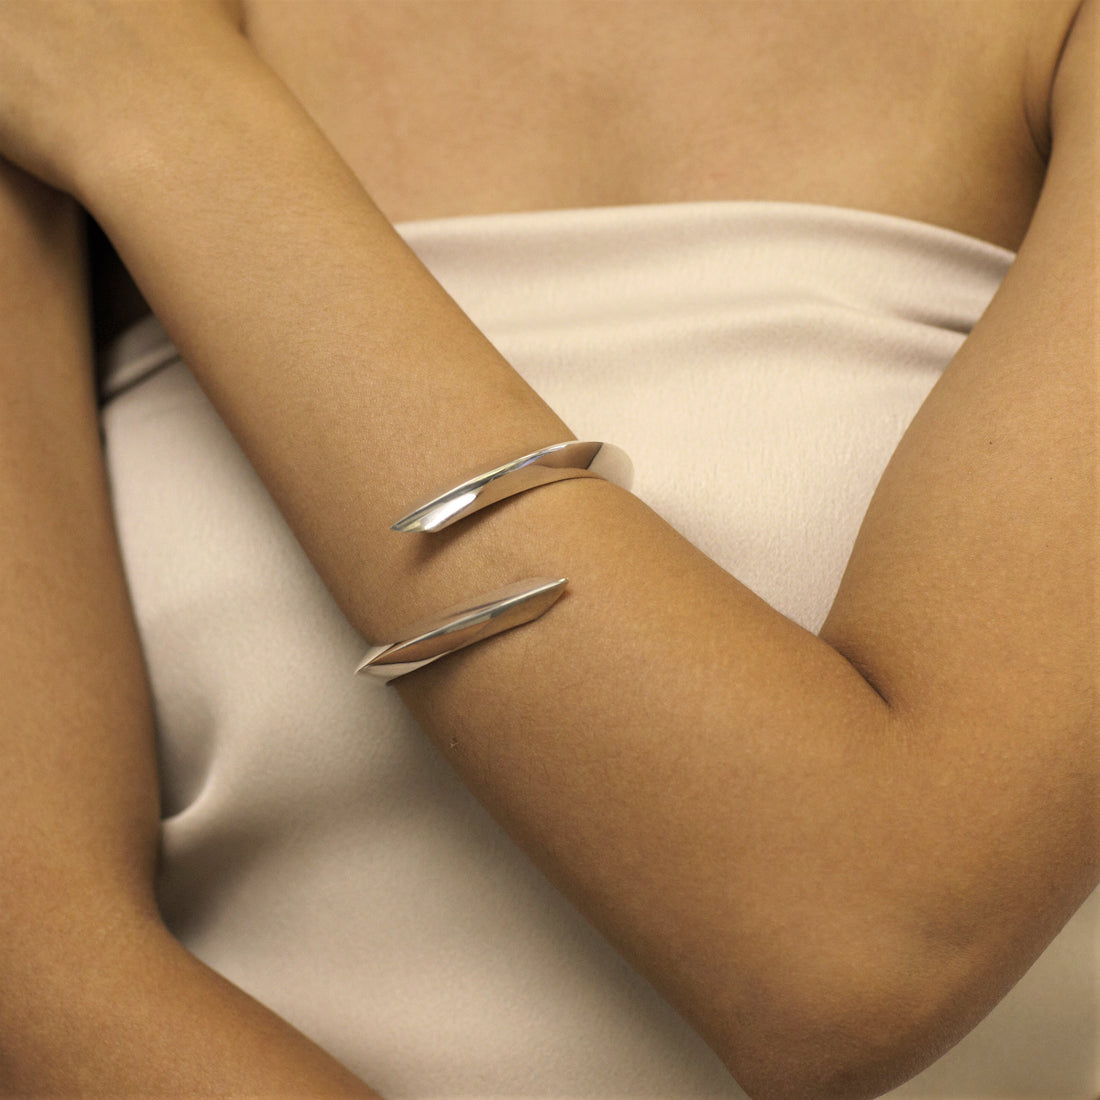 RULE THE COURT STATEMENT BRACELET in silver